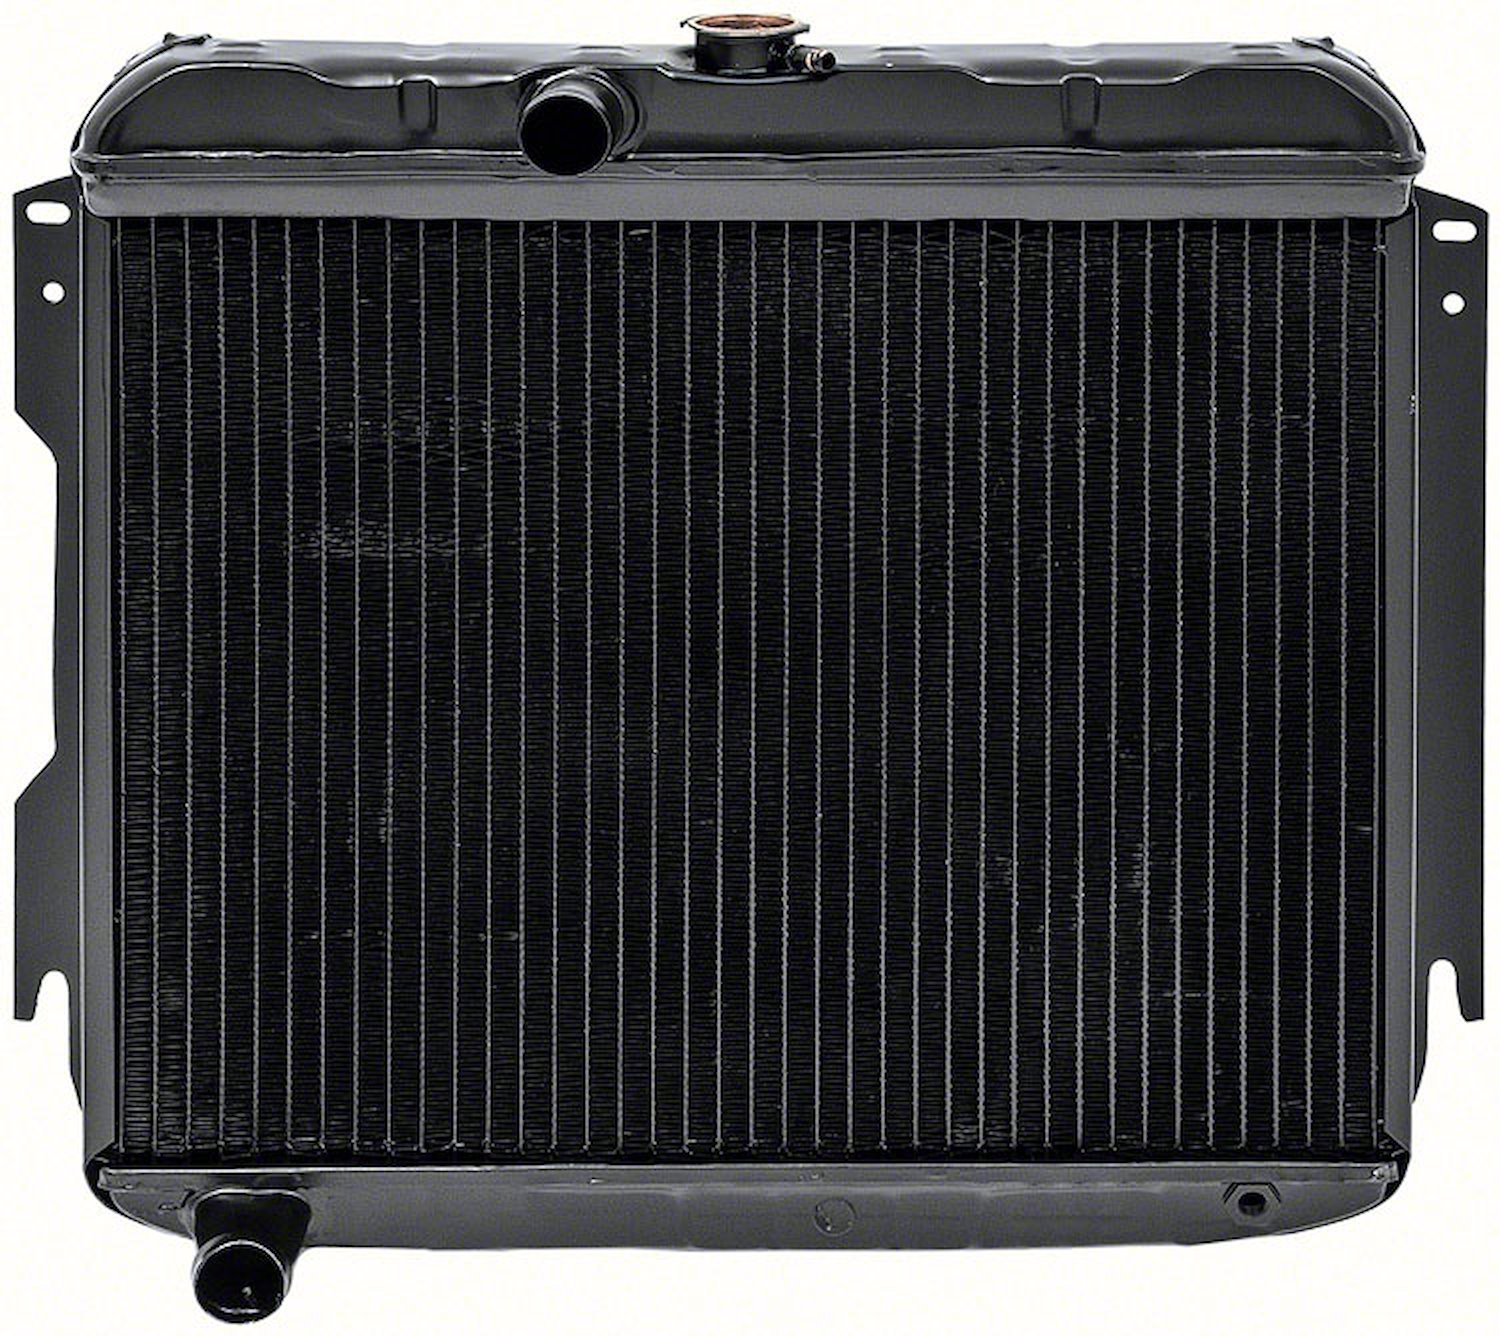 MB2363S Replacement Radiator 1963-64 Dodge B-Body V8 318Ci With Standard Trans 3 Row